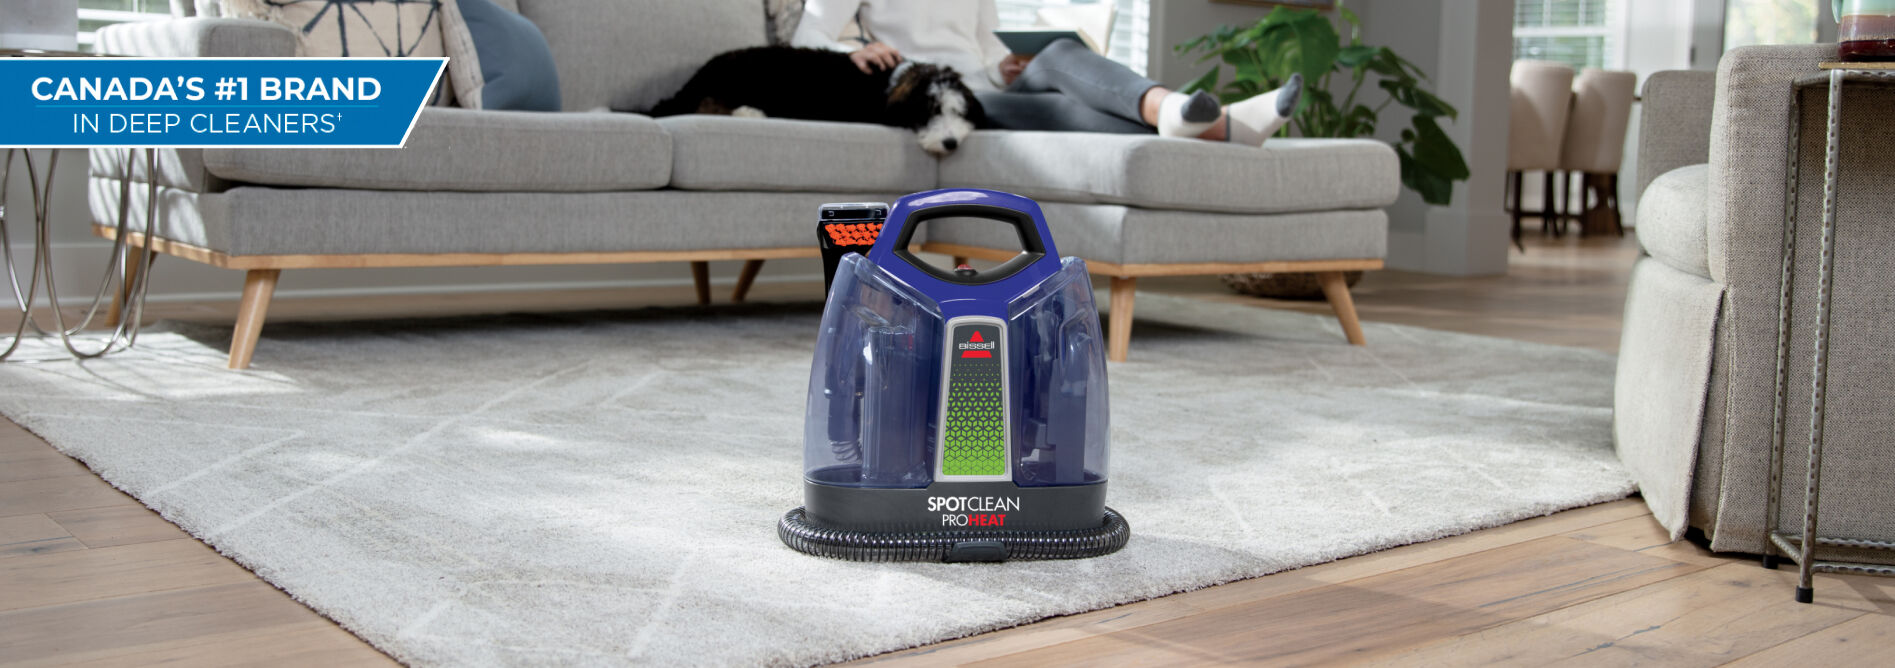 BISSELL SpotClean, Quickly Removes Stains Carpets, Rugs, and Upholstery